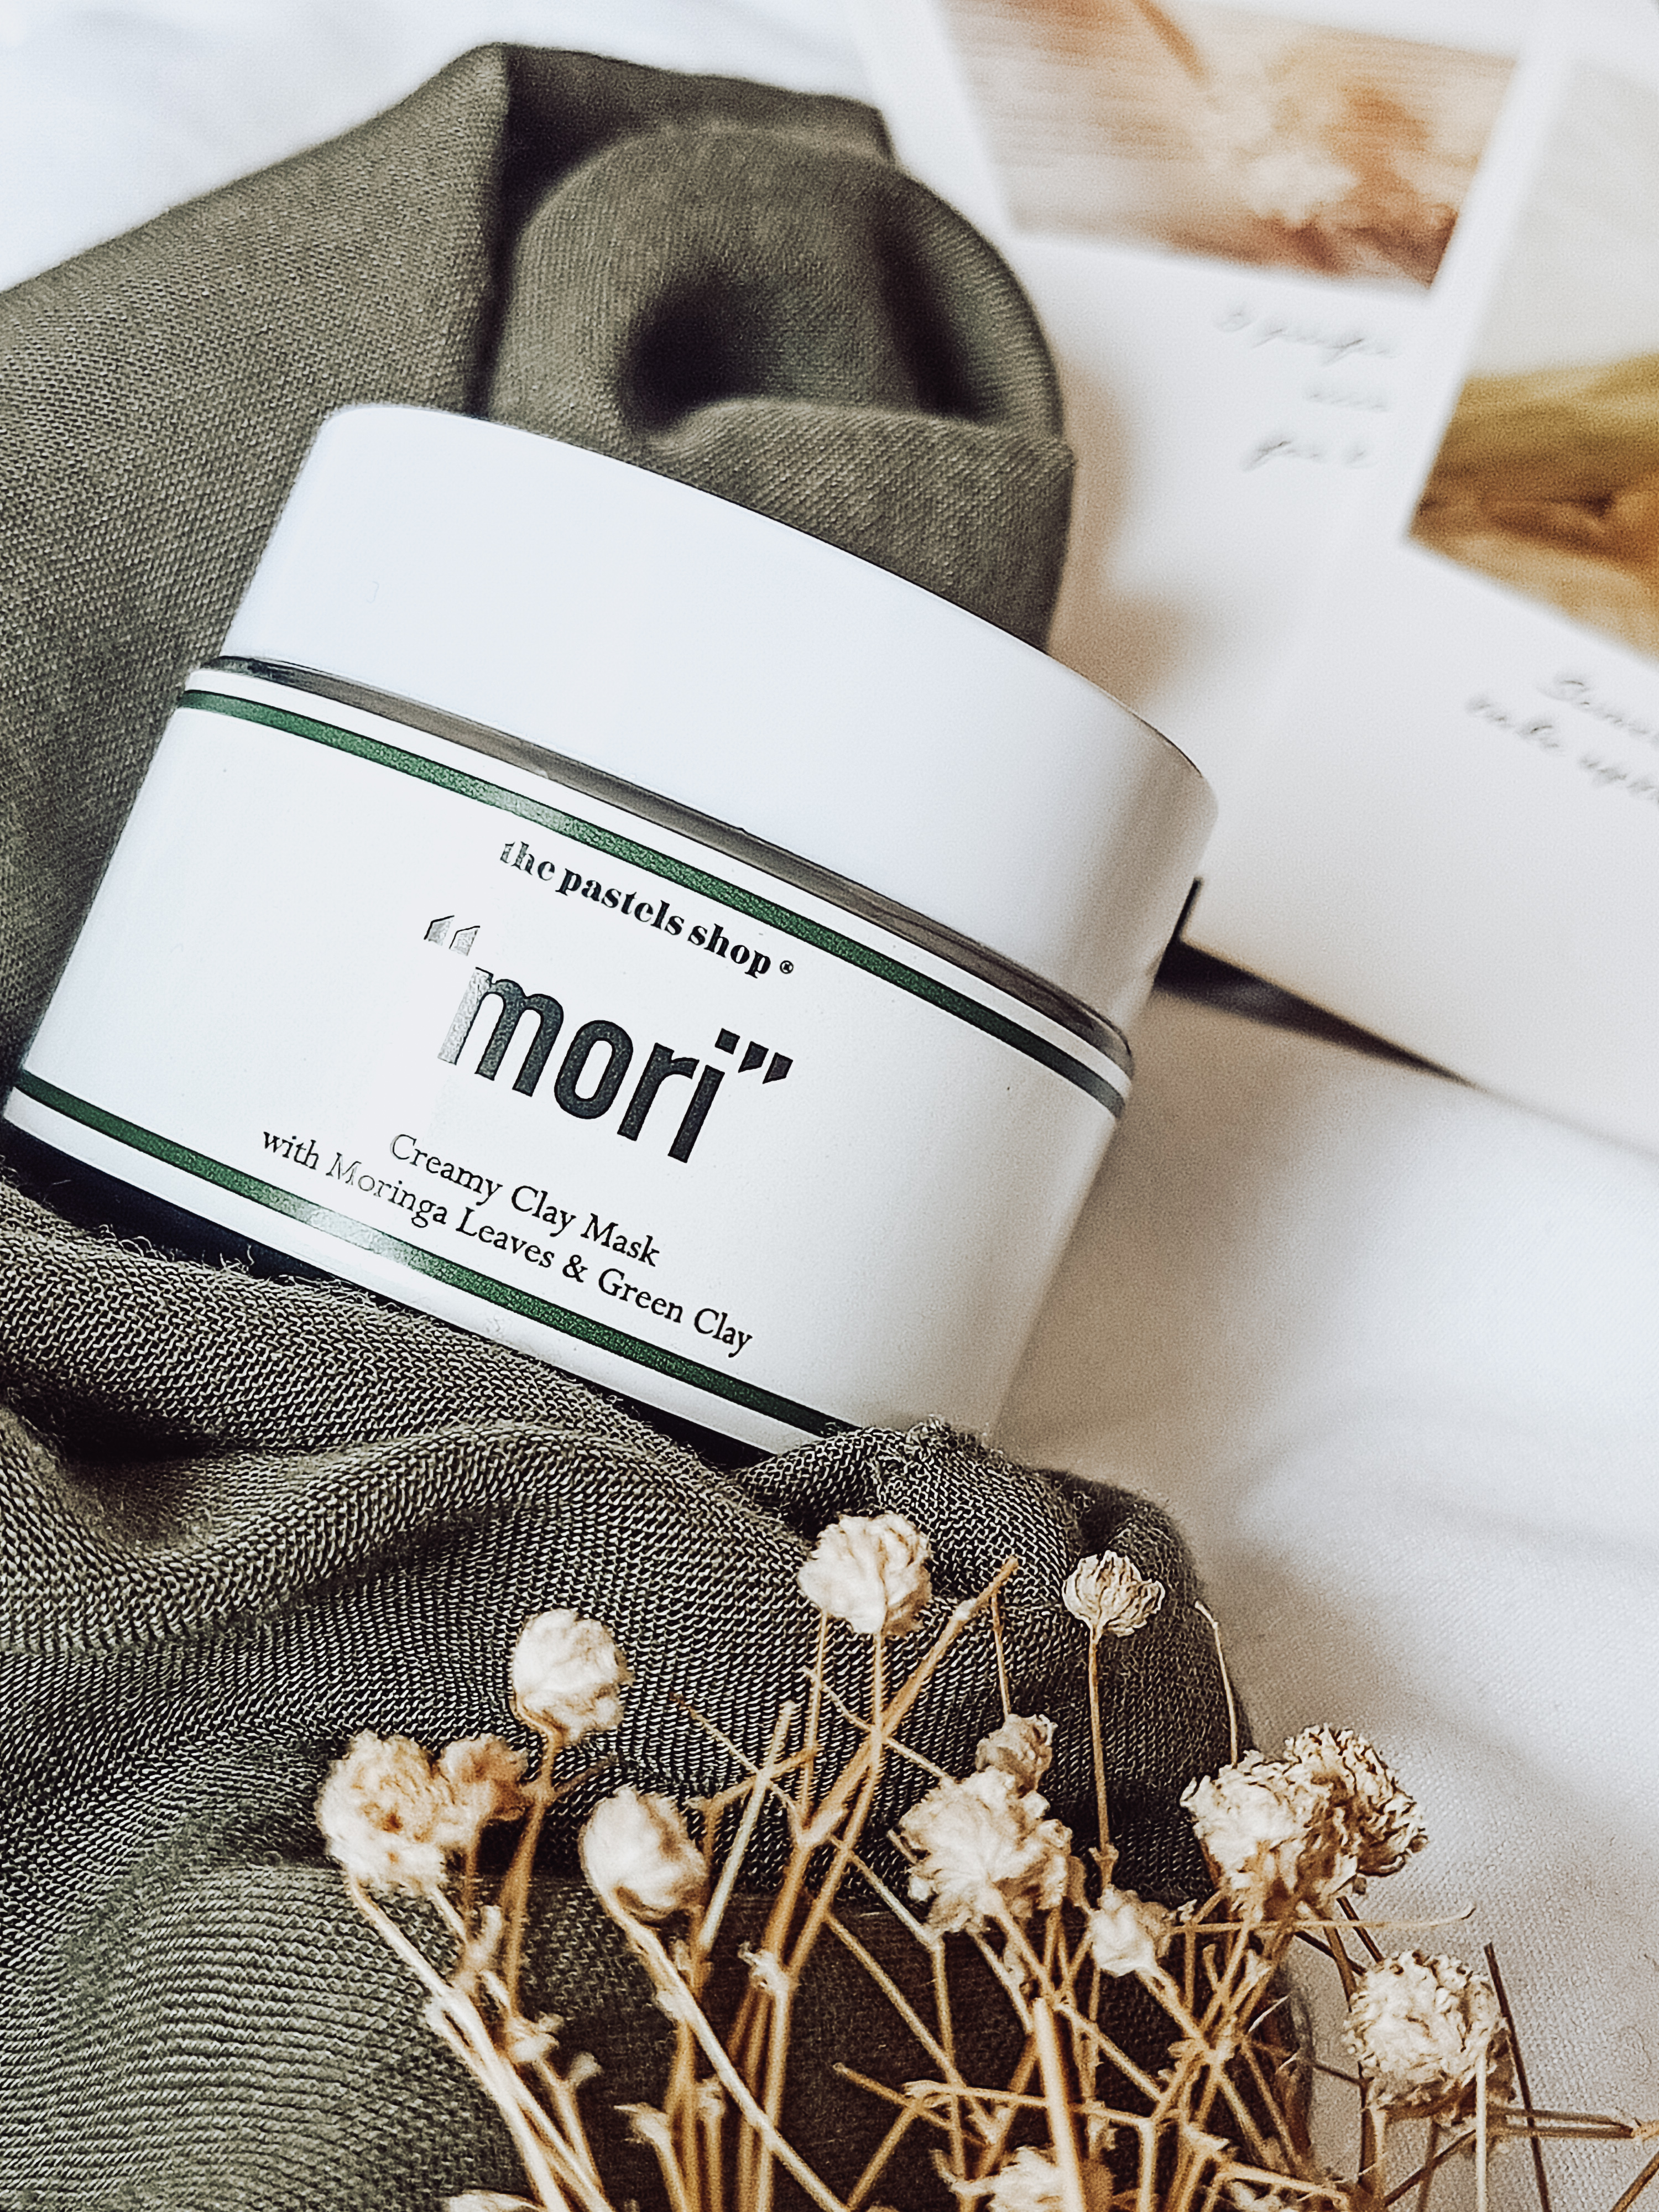 THE PASTELS SHOP "Mori" Creamy Clay Mask with Moringa Leaves & Green Clay Review by Suriabdulrahman